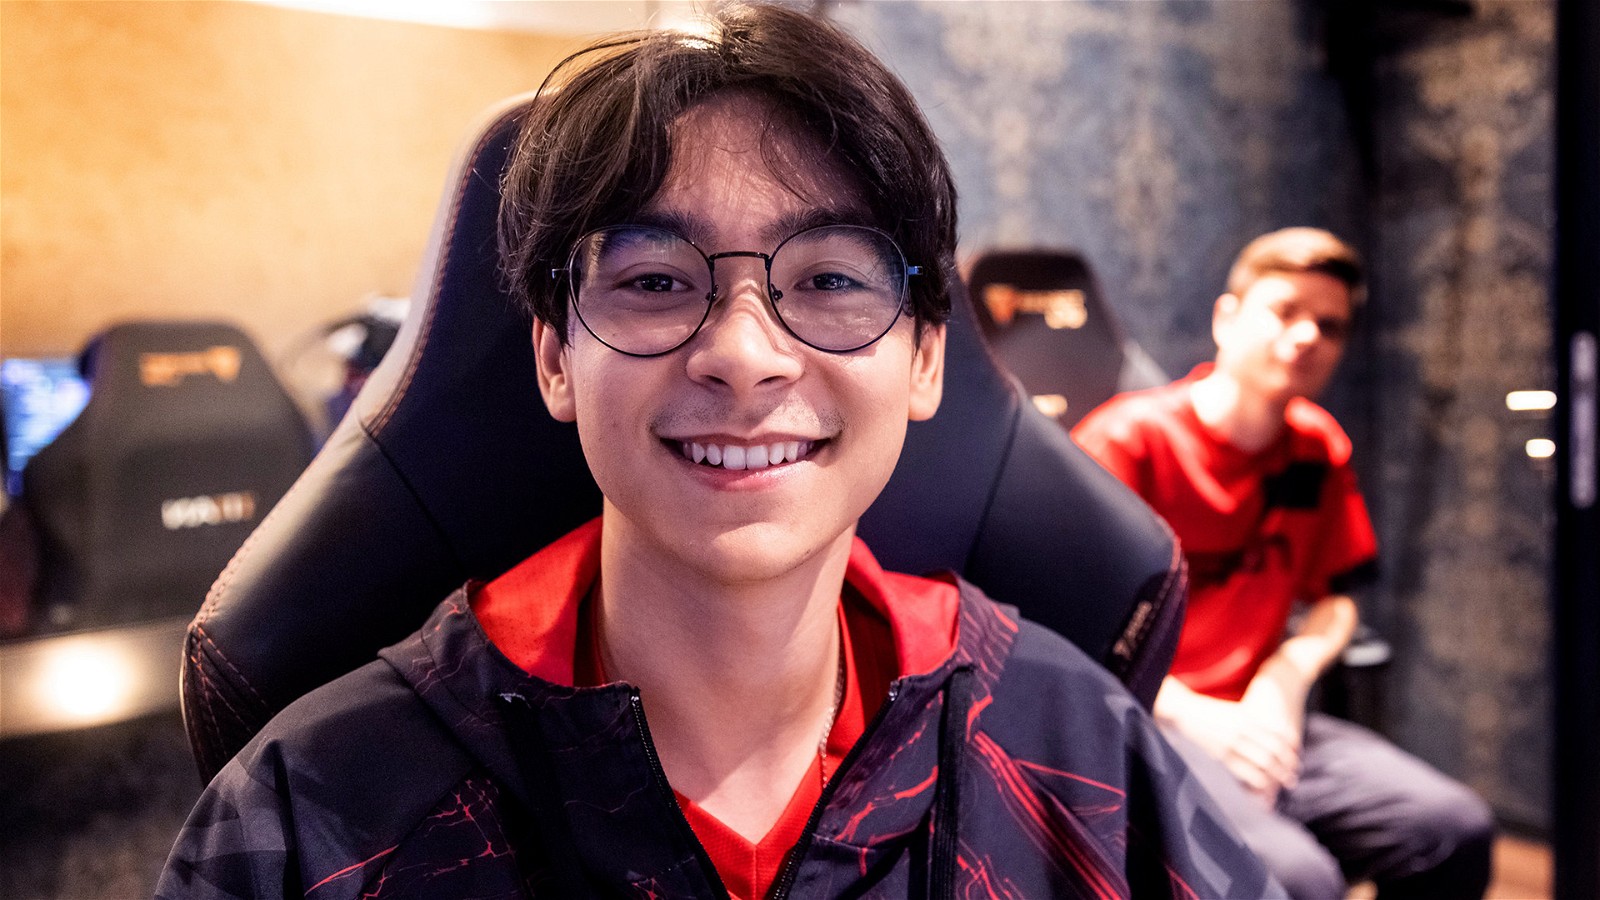 Tyson "TenZ" Ngo is one of the best players in Valorant. He showcases his mechanical magic while streaming and as a professional player for Sentinels.